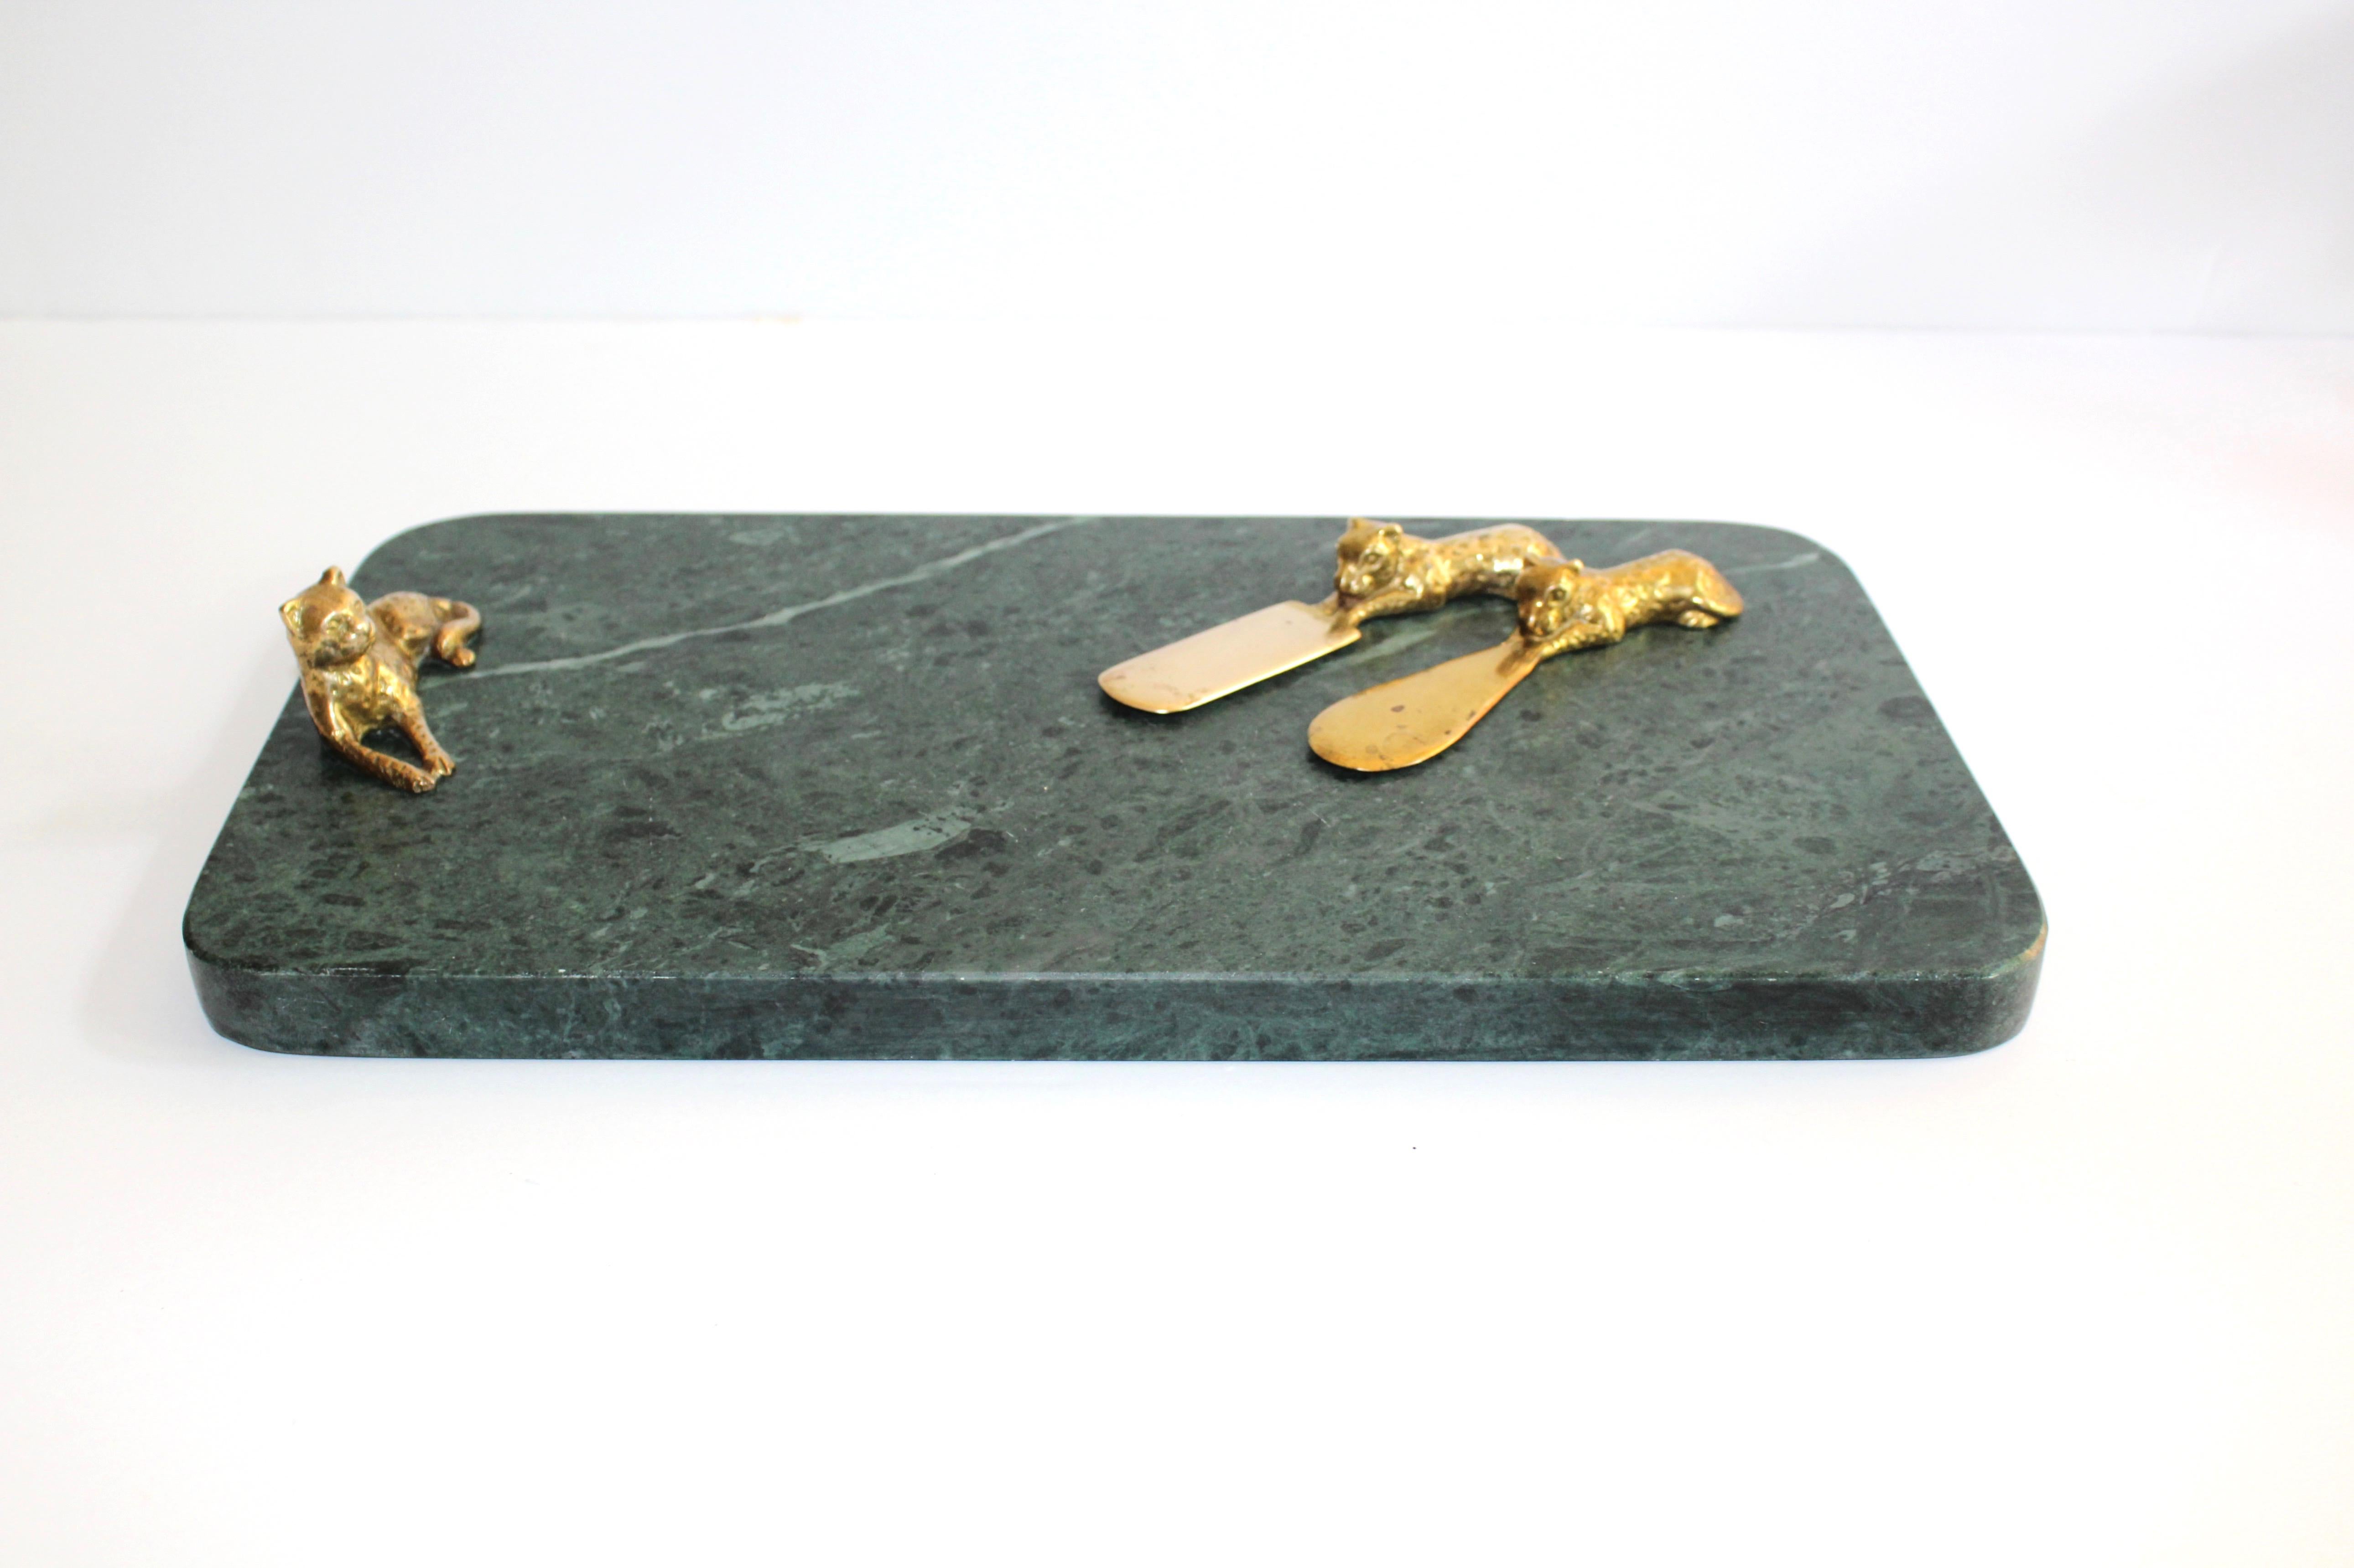 Mid-Century Modern serving tray and cheese board in gorgeous dark green marble. Natural stone with rich veins of dark green colors and textures, features a resting leopard handle in gold plated brass as well as two leopard serving knives. Rectangle